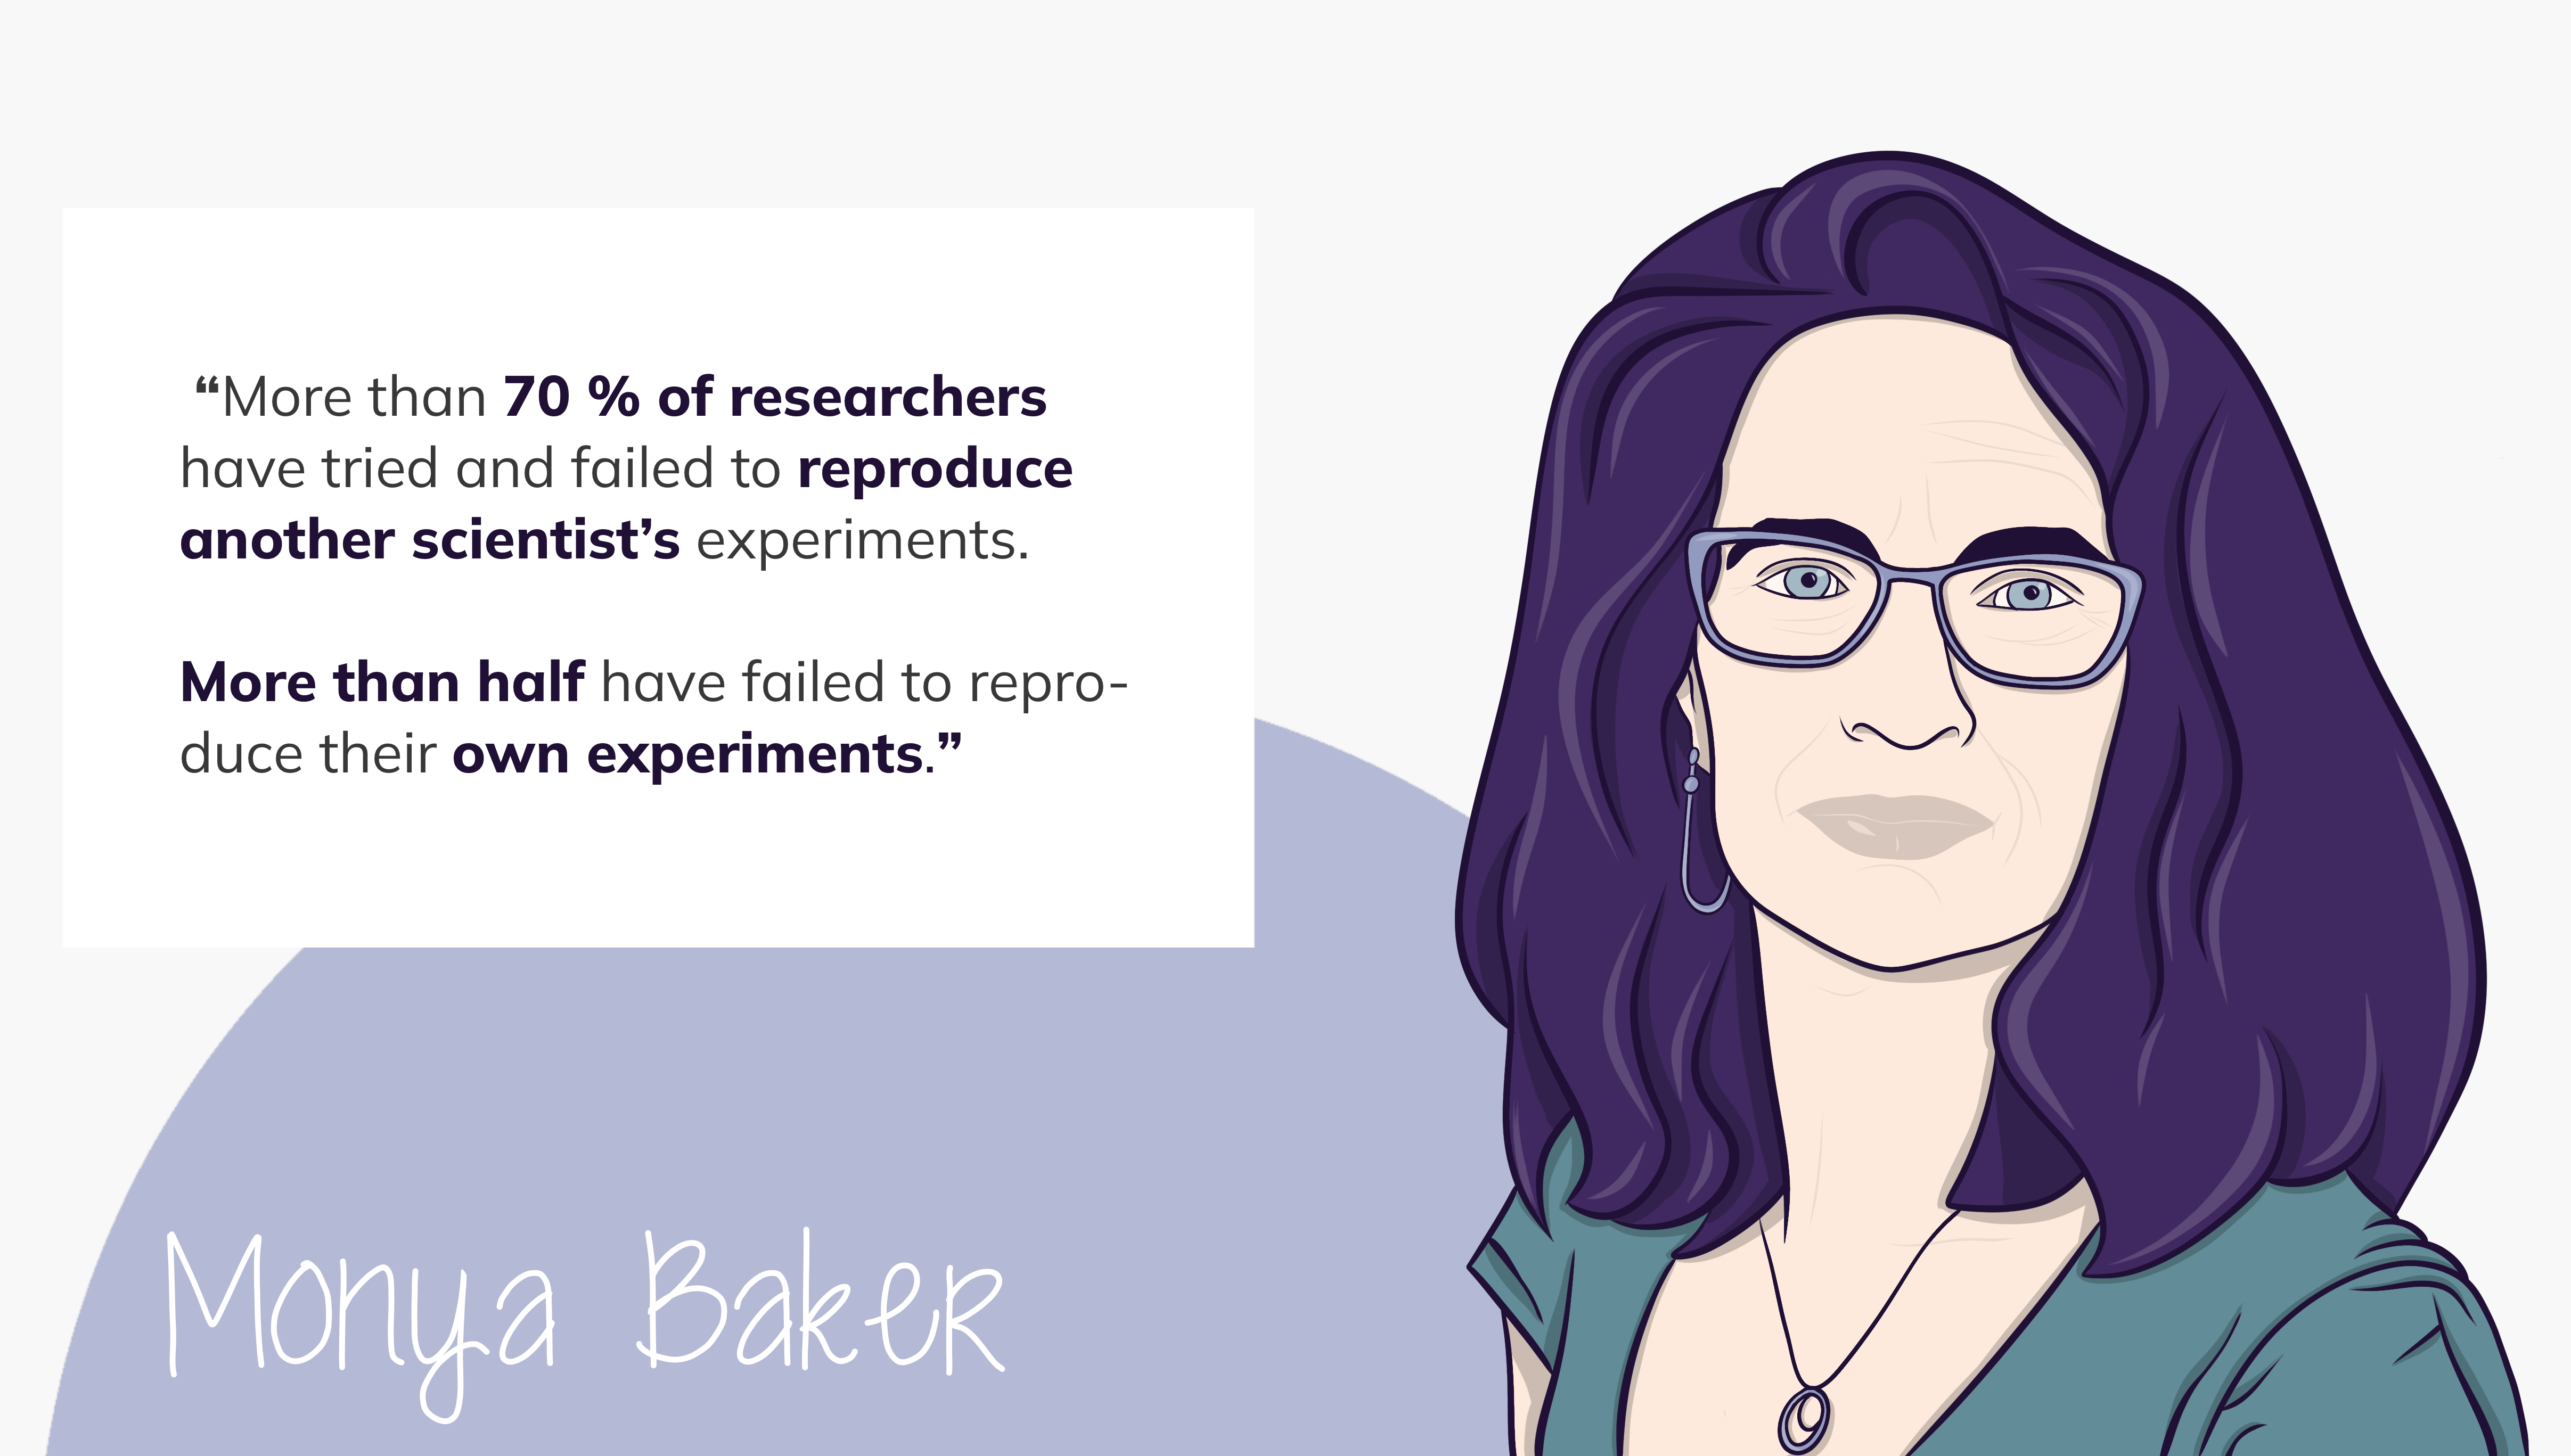 Quote by Monya Baker in Nature from 2016, saying 'More than 70% of researchers have tried and failed to reproduce another scientist's experiments. More than half have failed to reproduce their own experiments.'